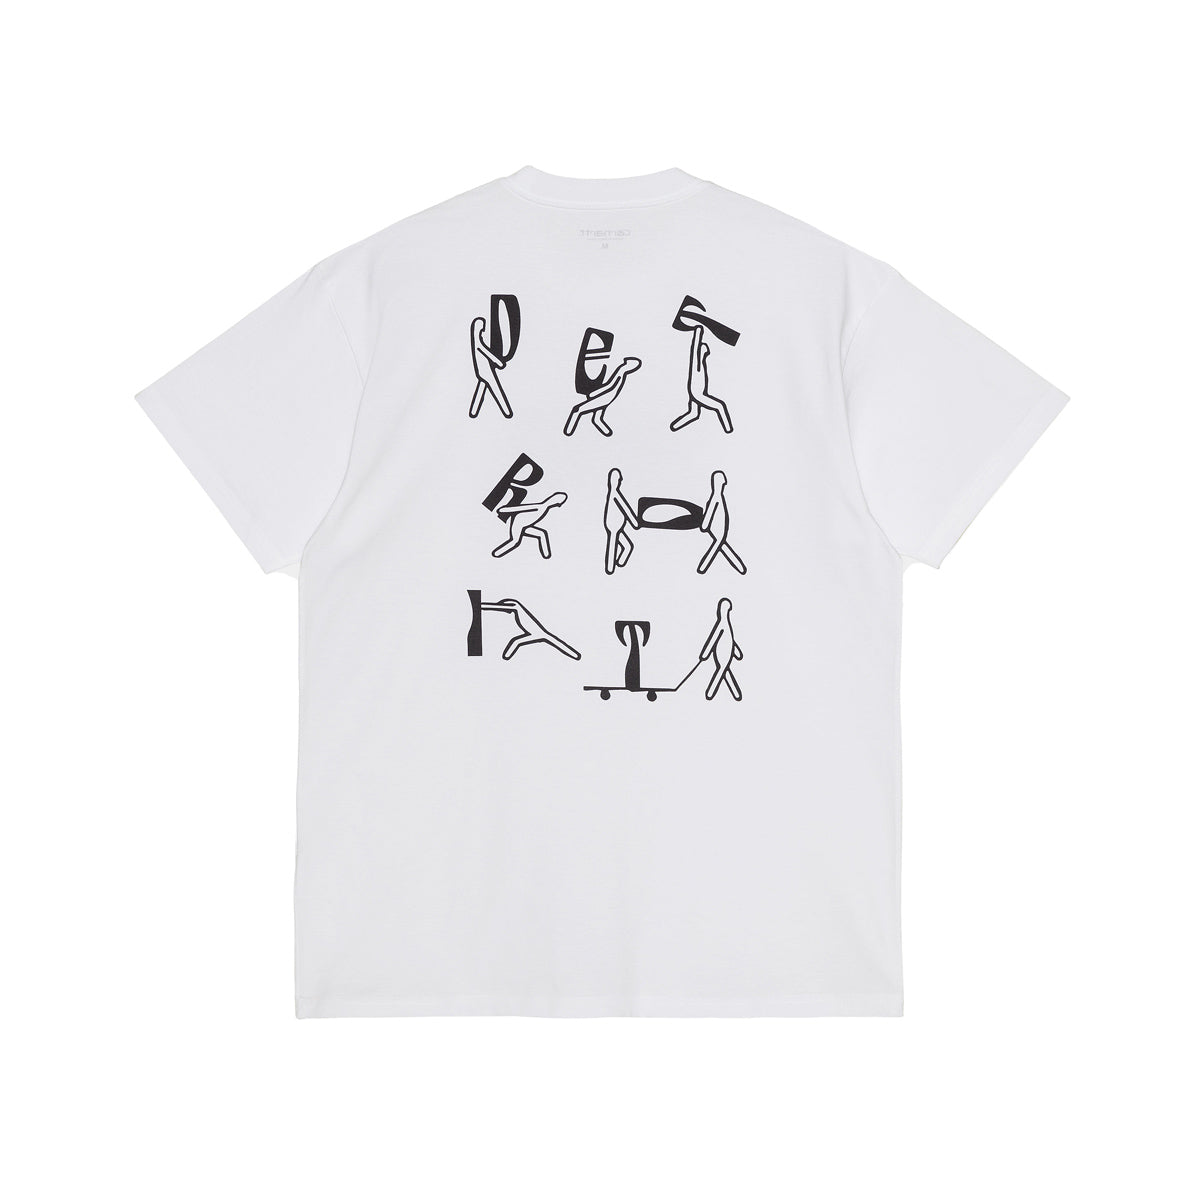 Carhartt WIP S/S Removals T-Shirt White Black